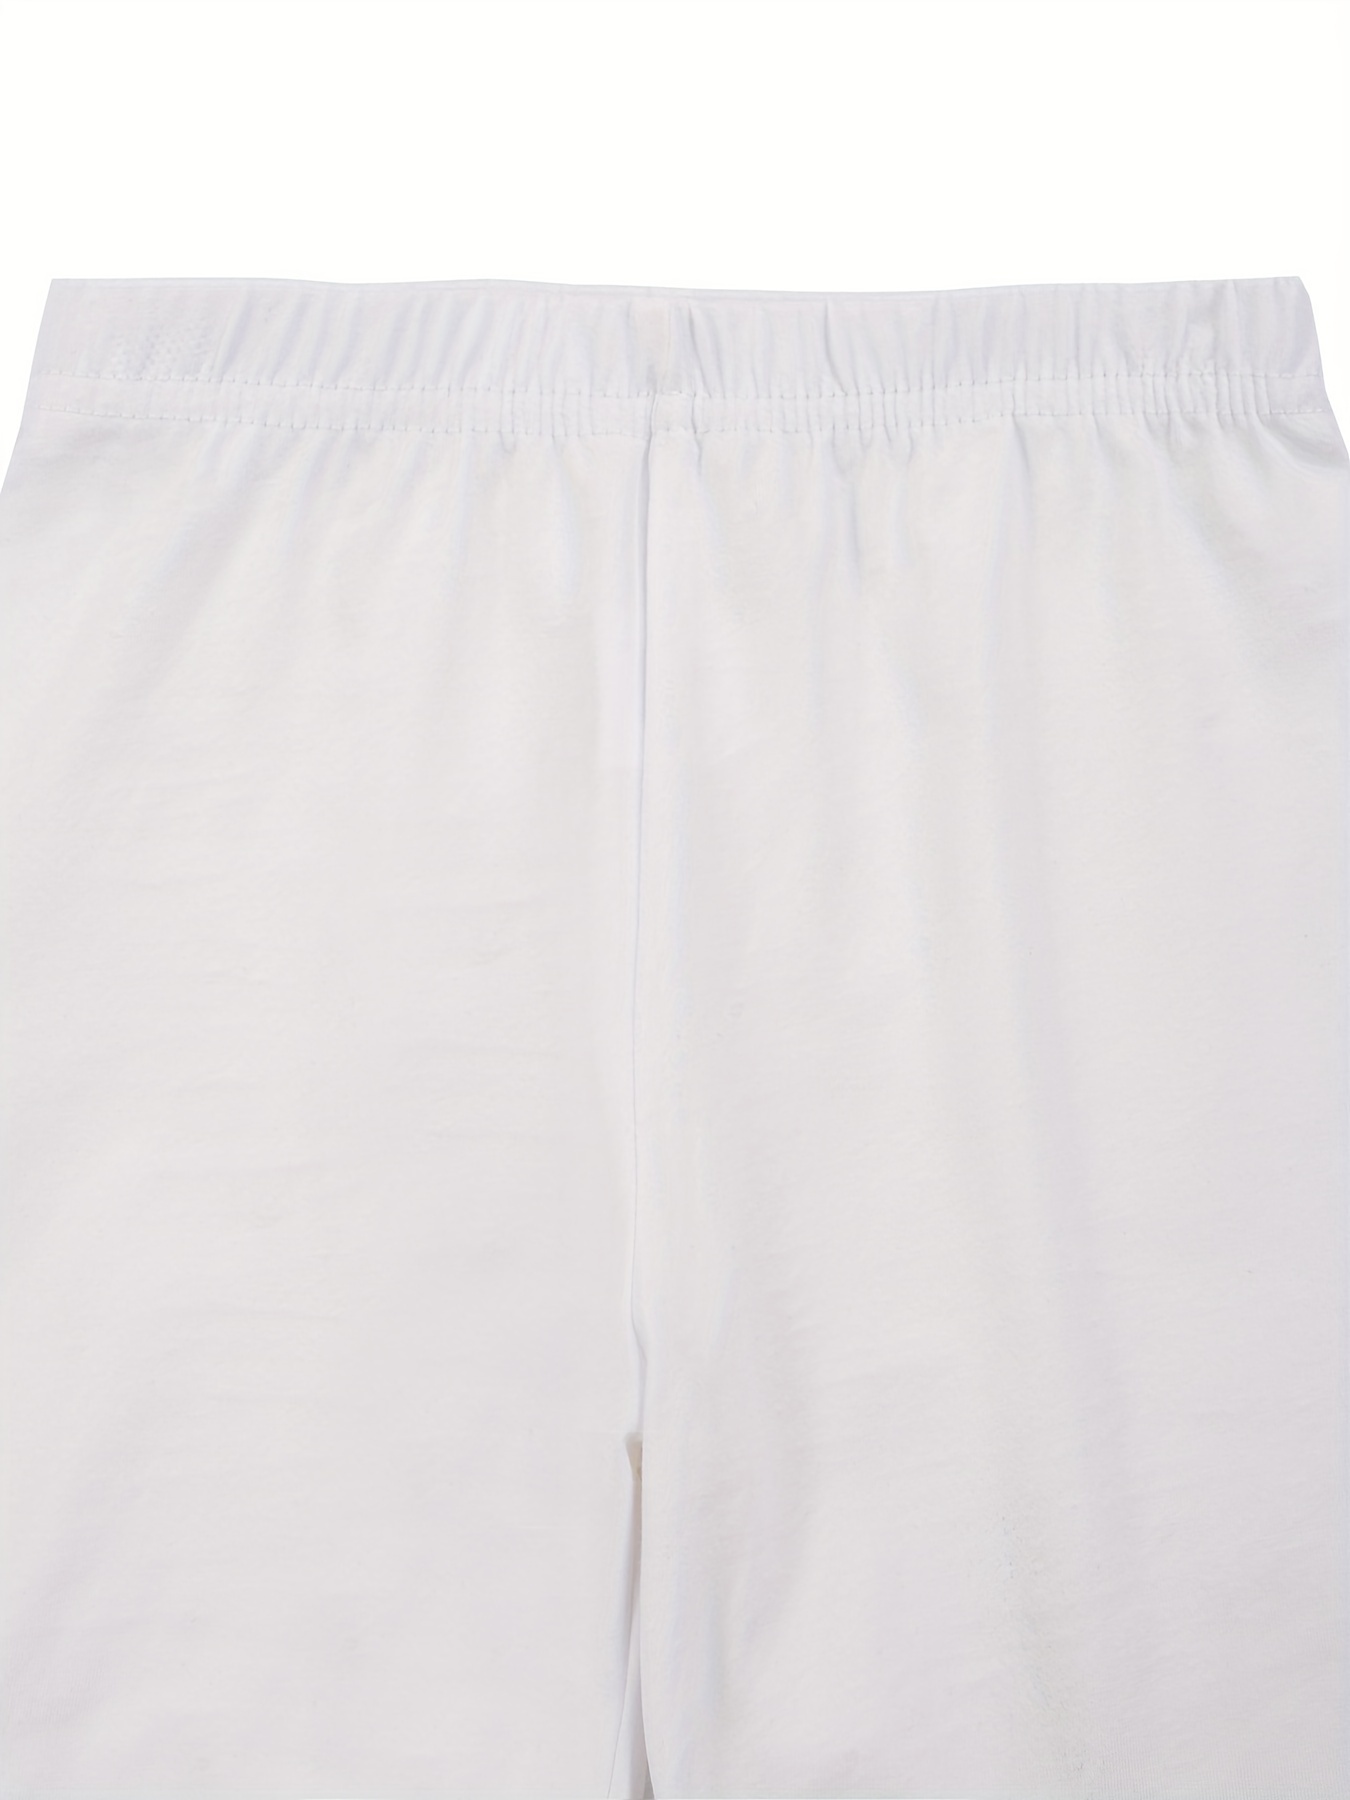 SAFETY SHORTS IN IVORY